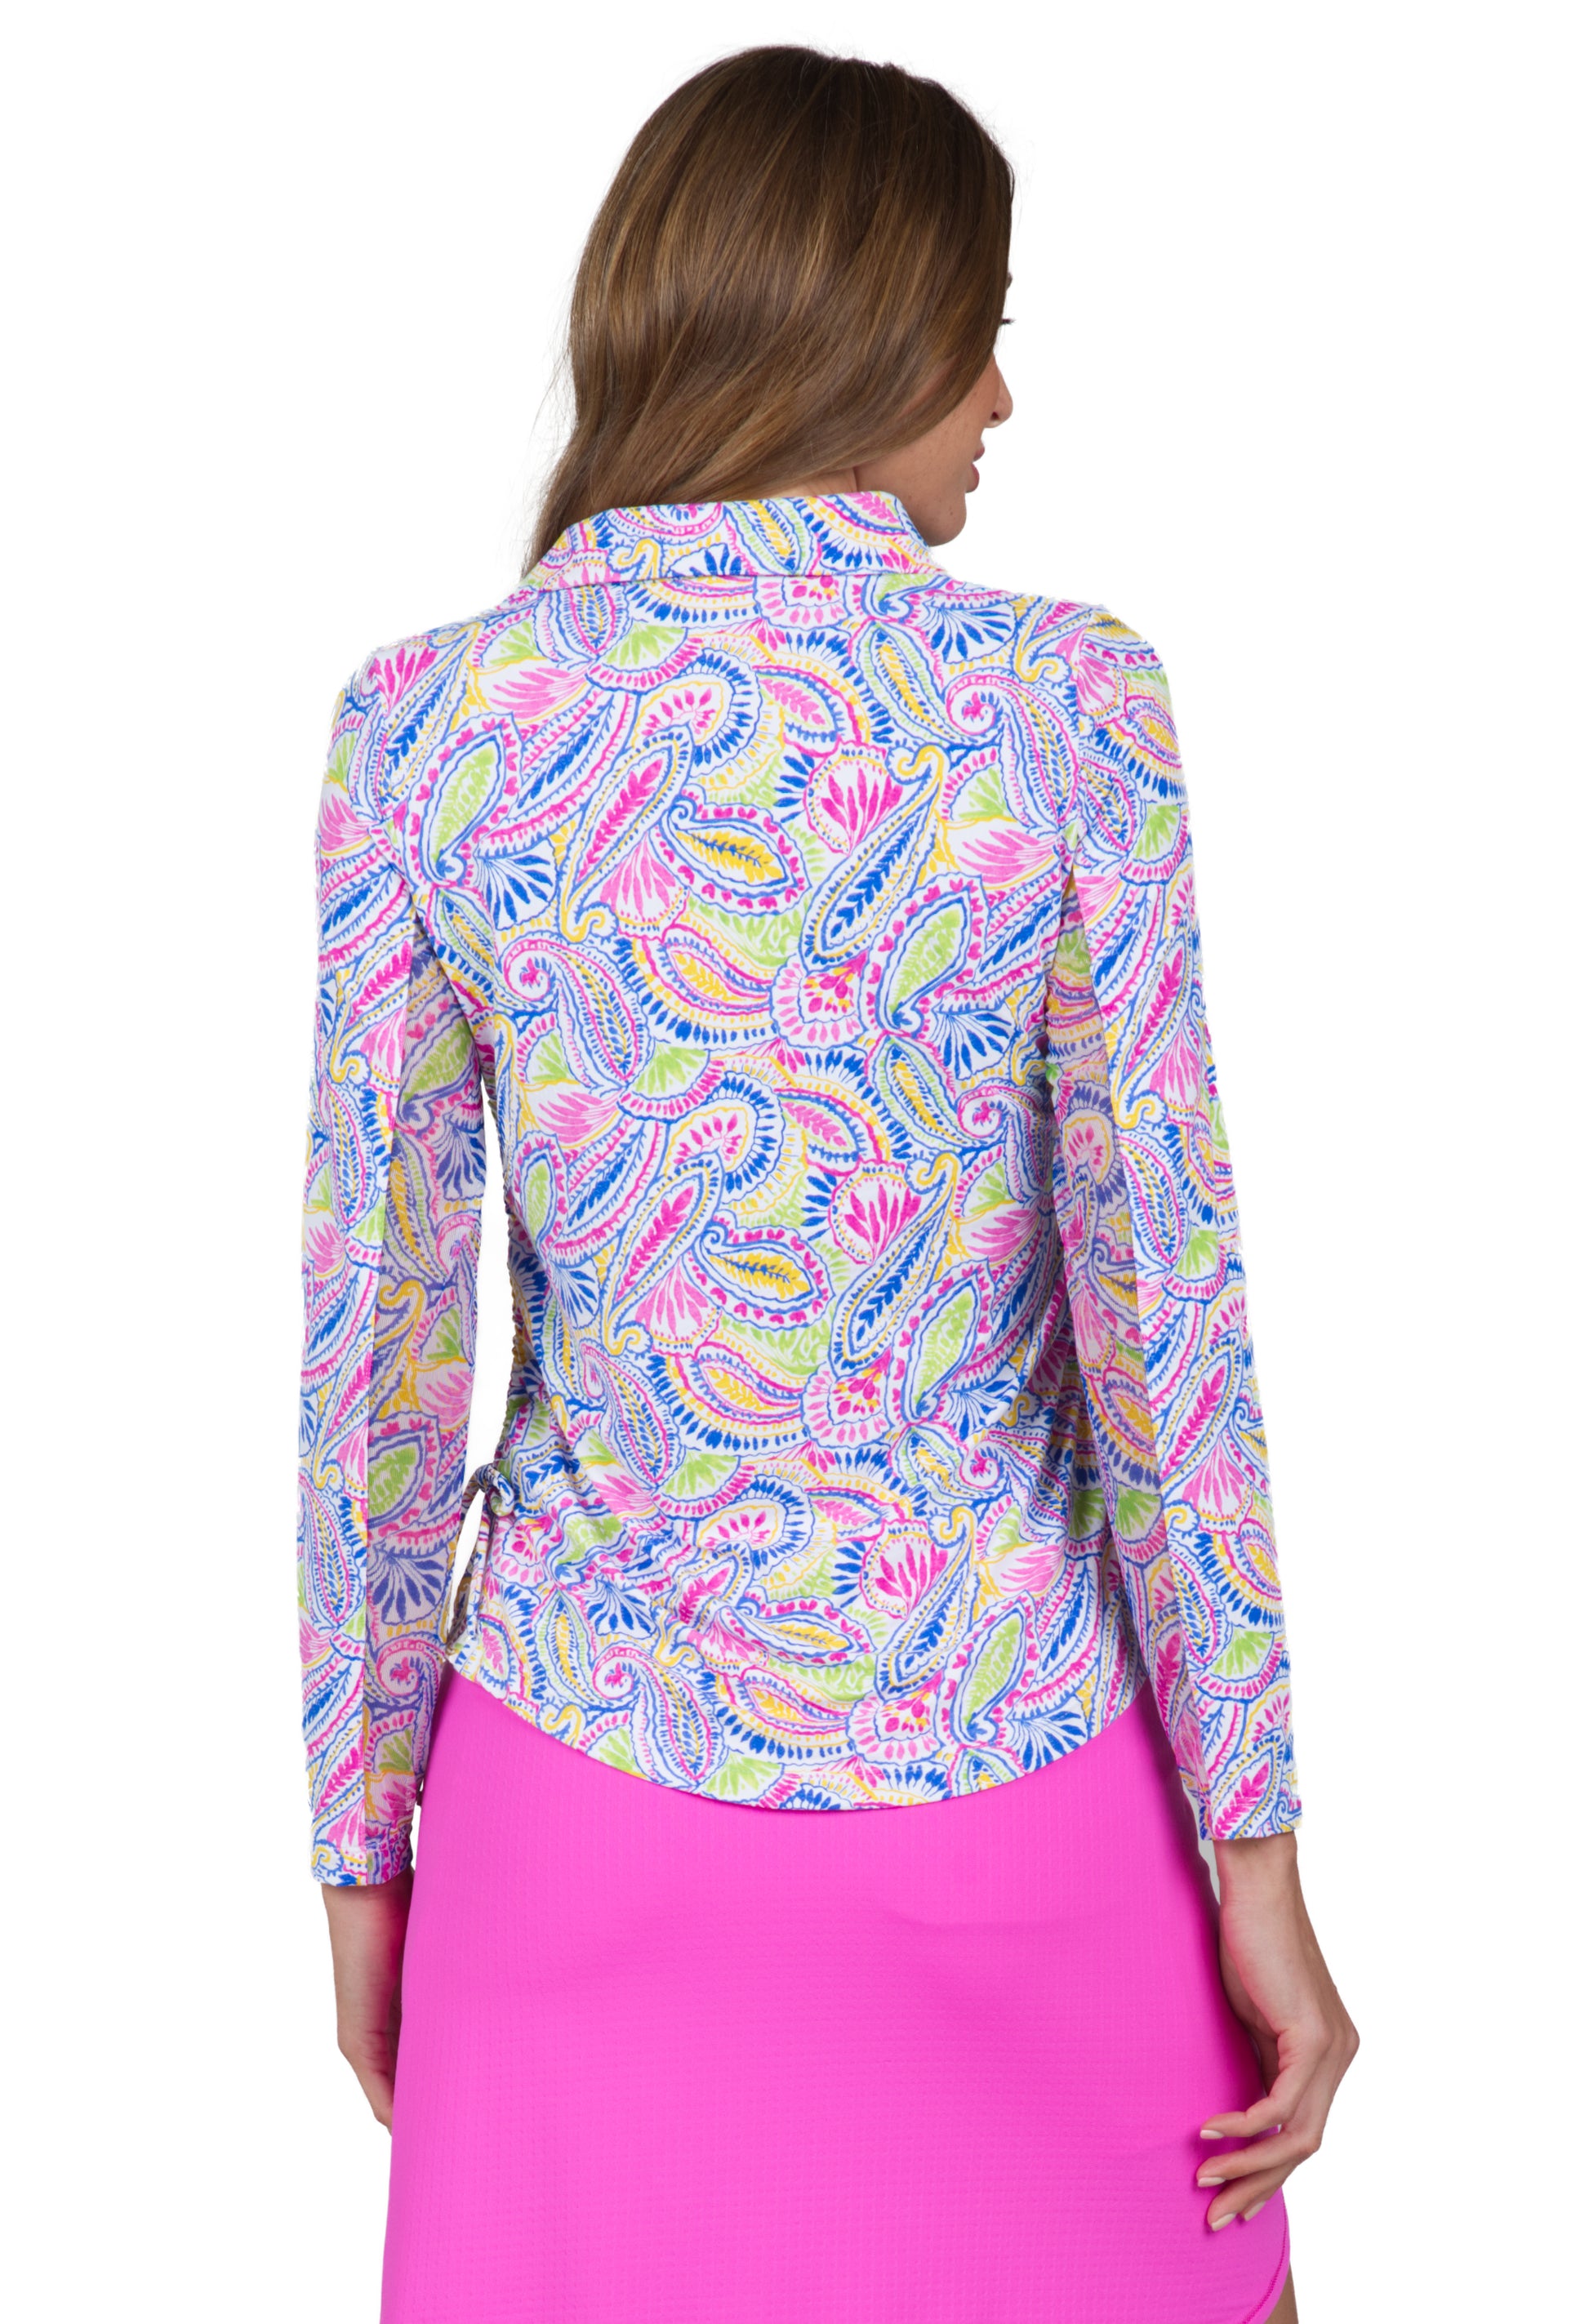 IBKÜL - Massie Print Adjustable Length Long Sleeve Polo - 48541 - Color: Hot Pink/Yellow